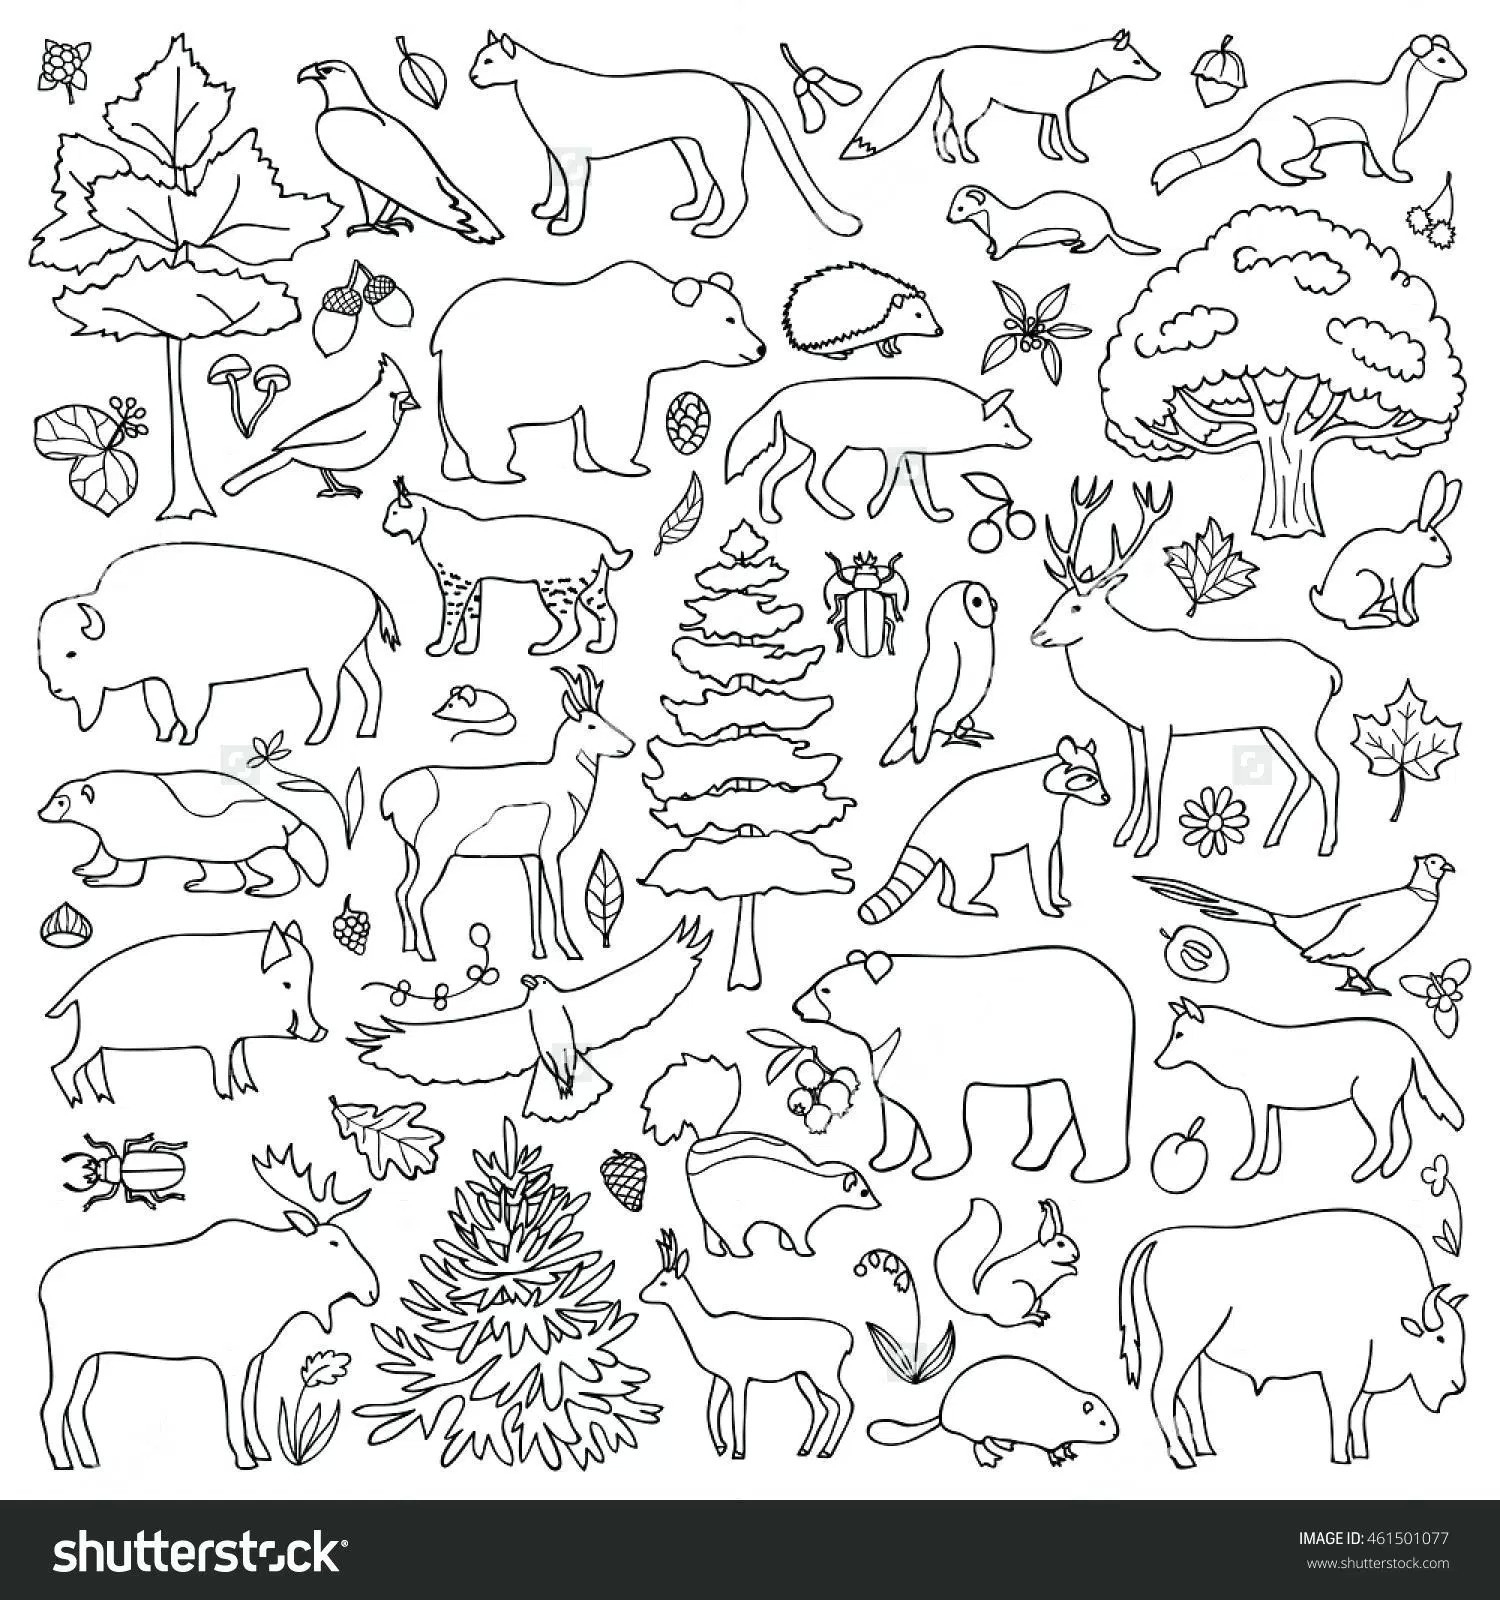 Animals In The Rainforest Coloring Pages Rainforest Tree Coloring Pages New Coloring Book World